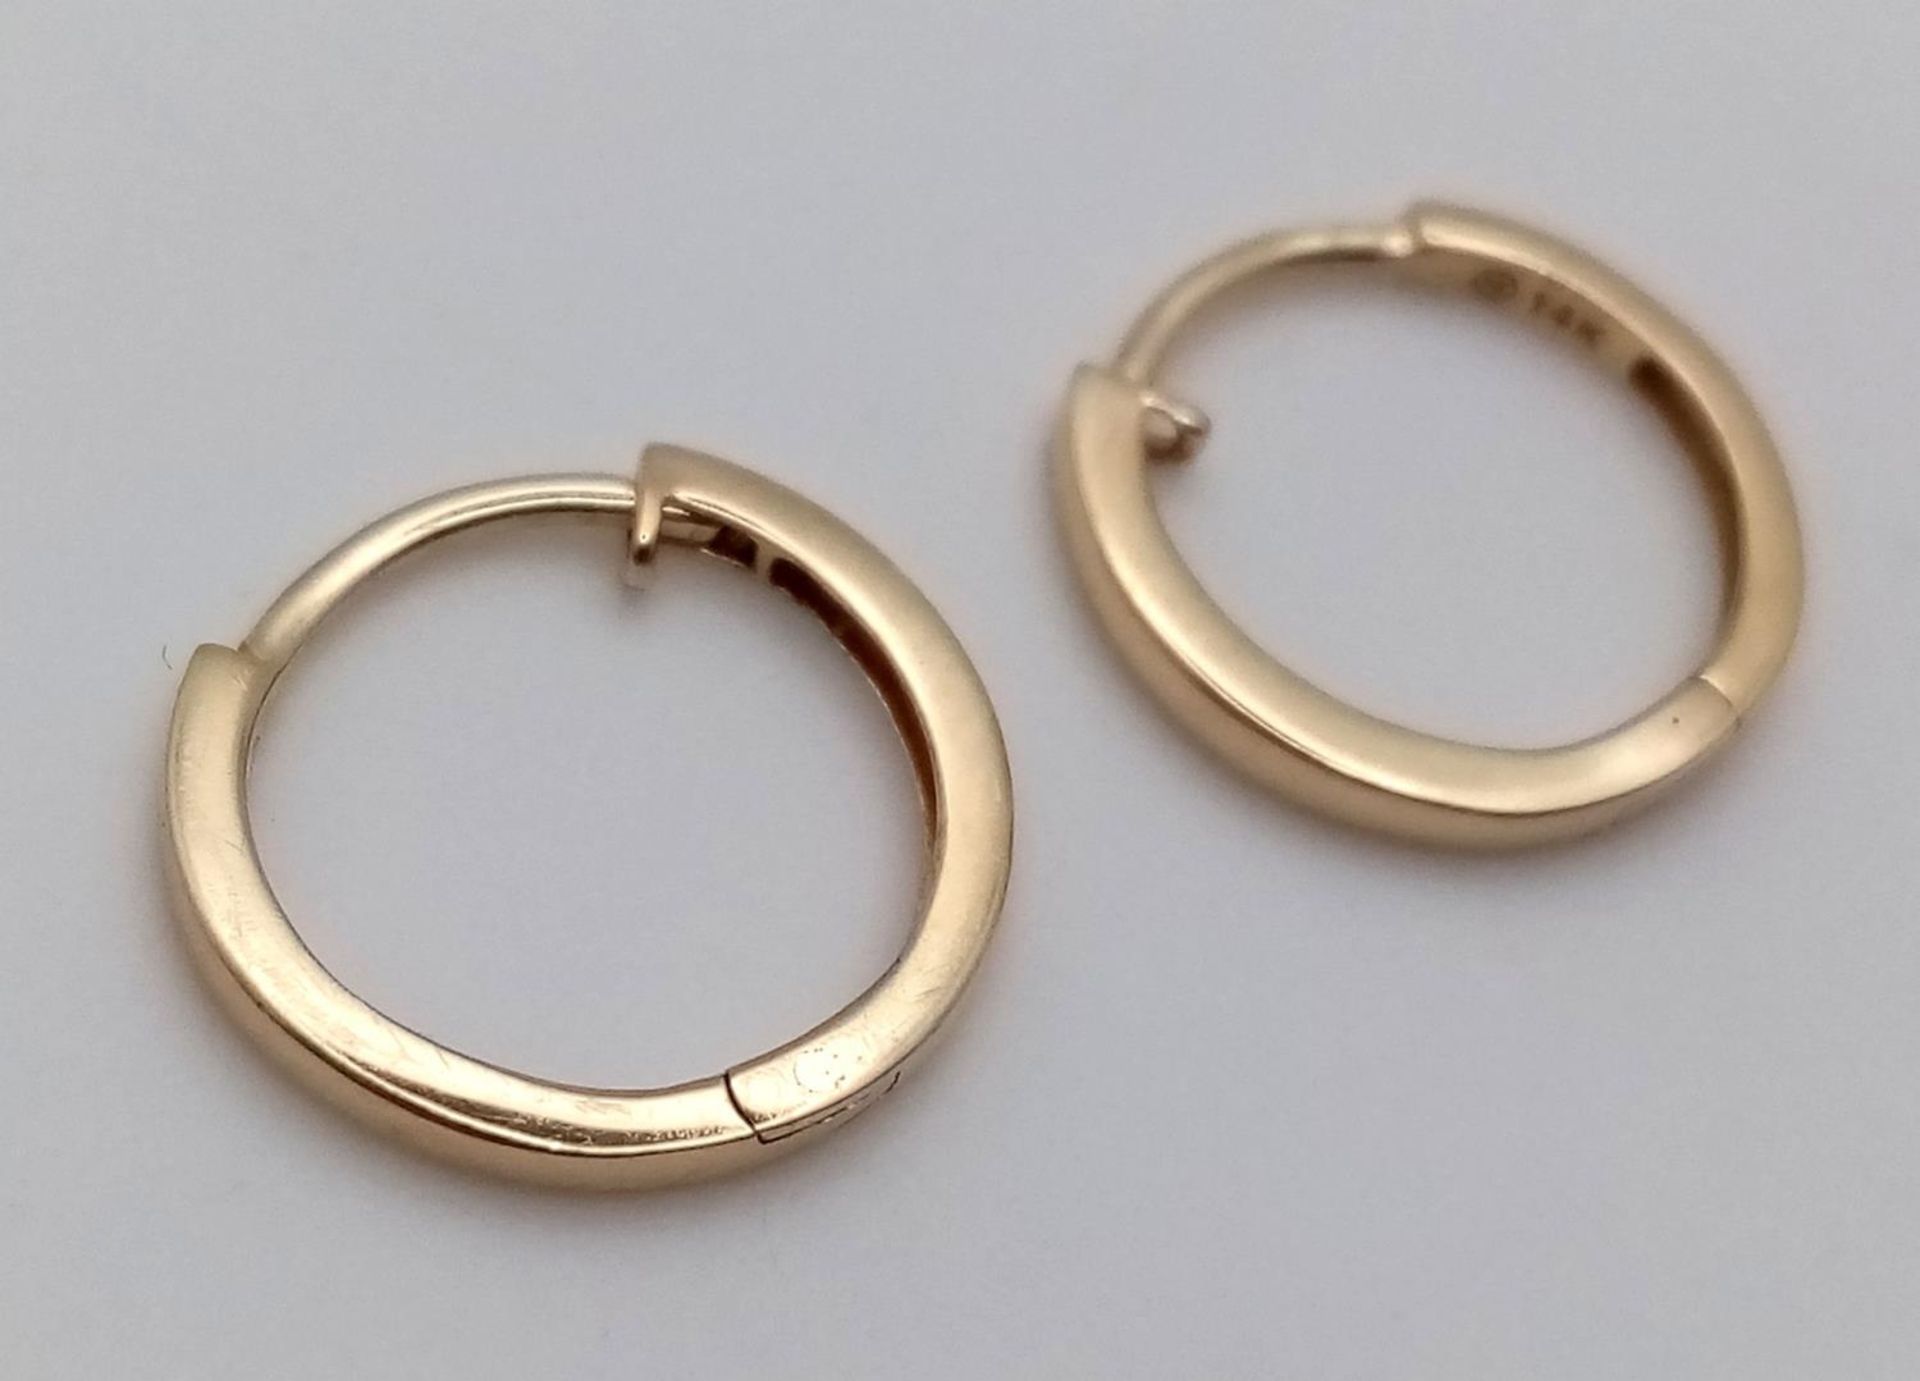 A Pair of Designer Massika 14K Yellow Gold Small Hoop Earrings. 0.8g total weight. - Image 4 of 4